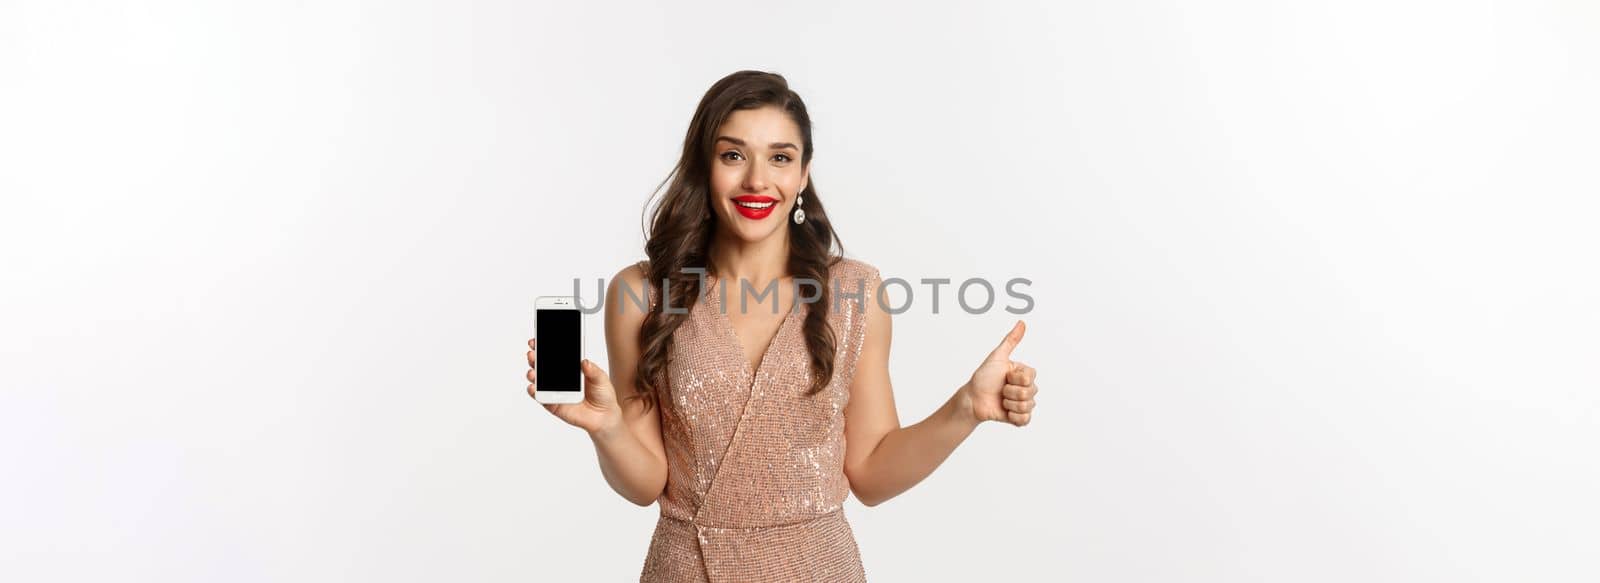 Online shopping. Beautiful young woman in party dress and makeup, showing thumbs up and mobile screen, praising good app, white background.